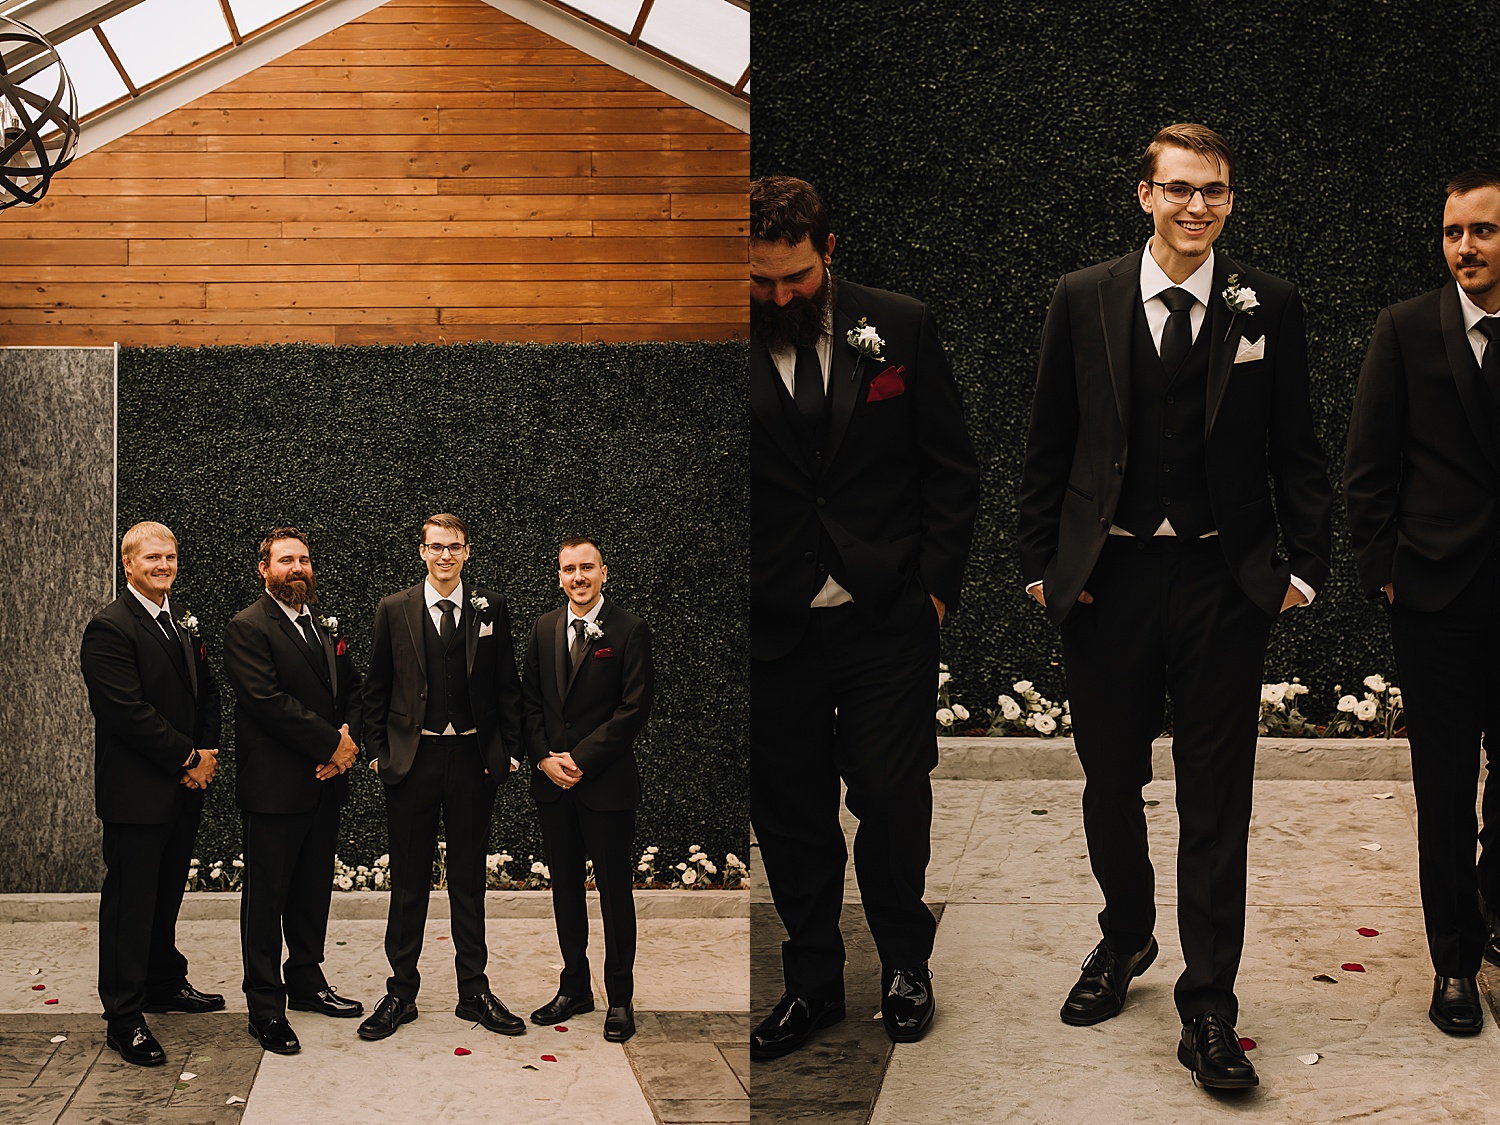 Groom and groomsmen wearing black tie attire with red accents